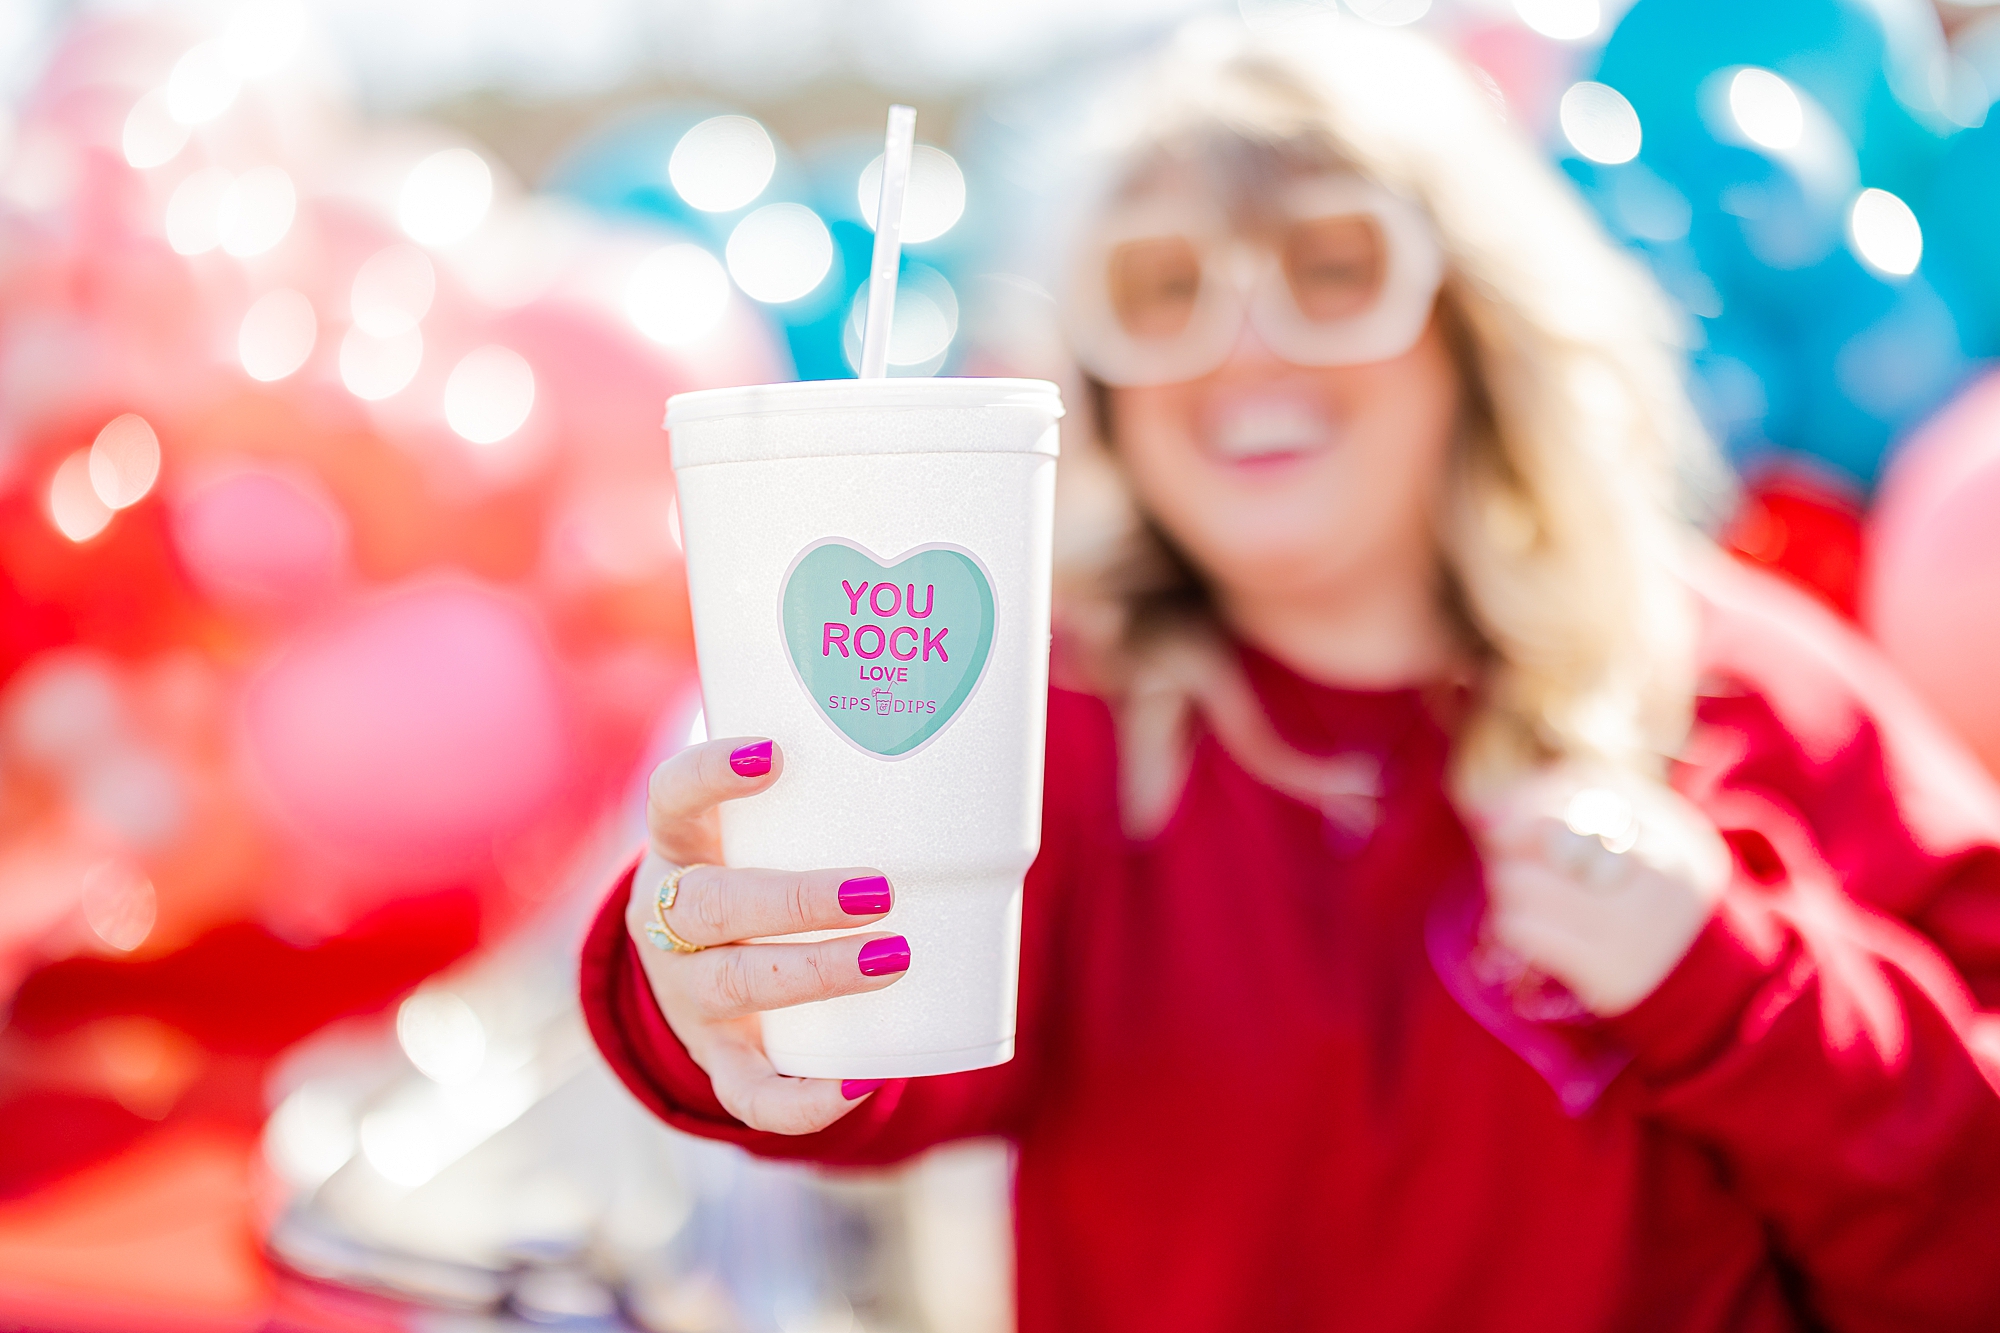 woman holds out soda cup with candy heart that says "you rock" 